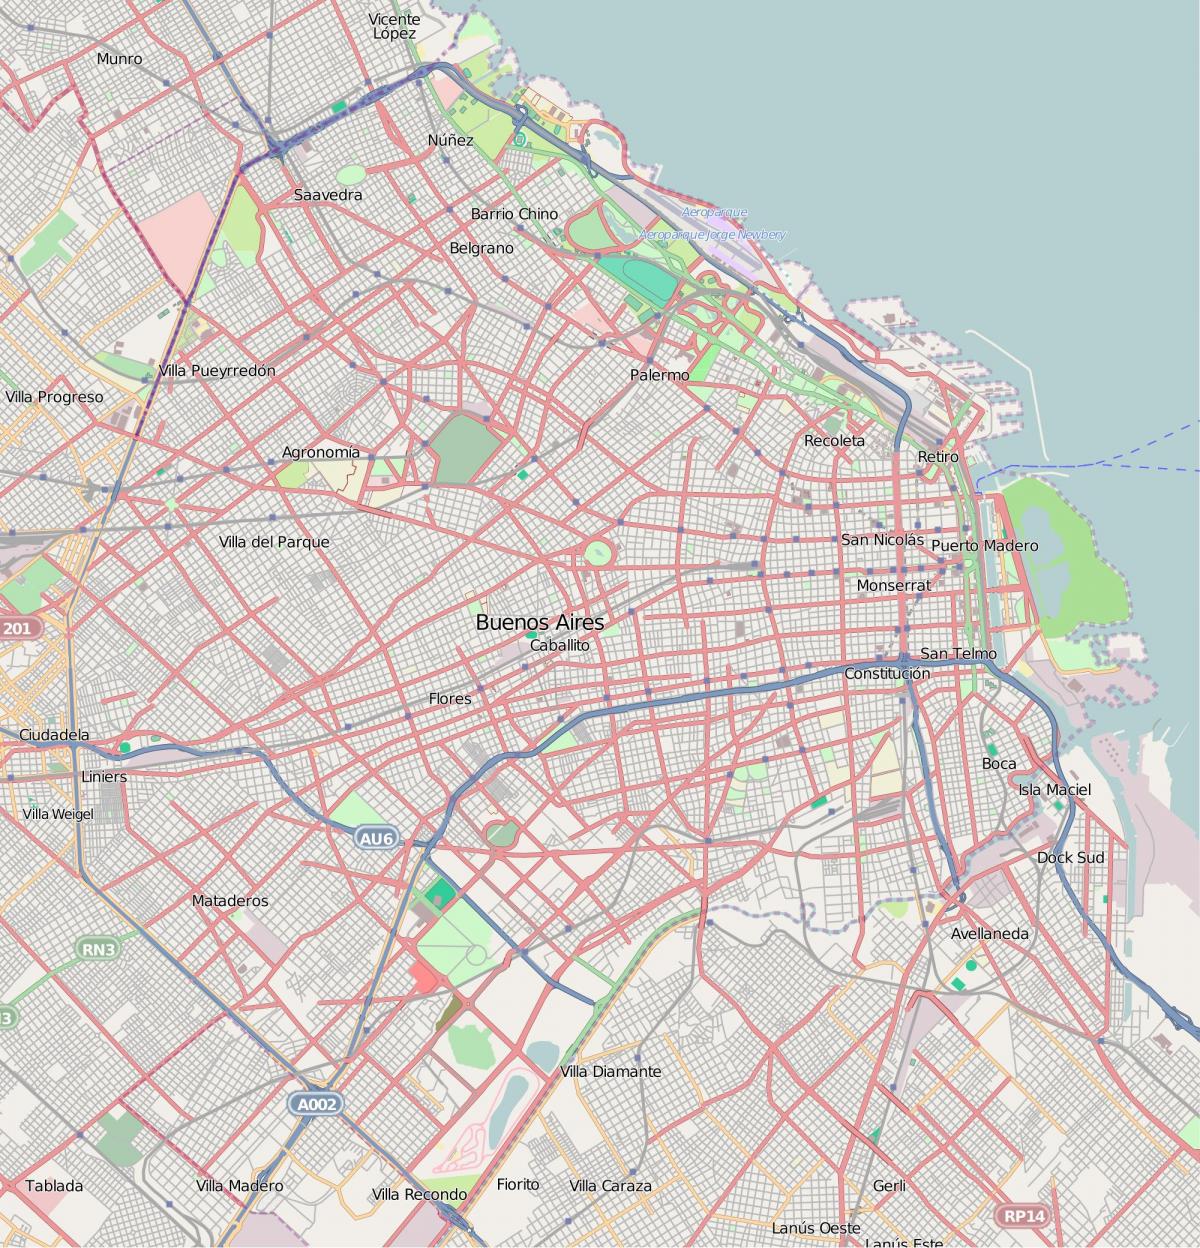 Mappa stradale di Buenos Aires